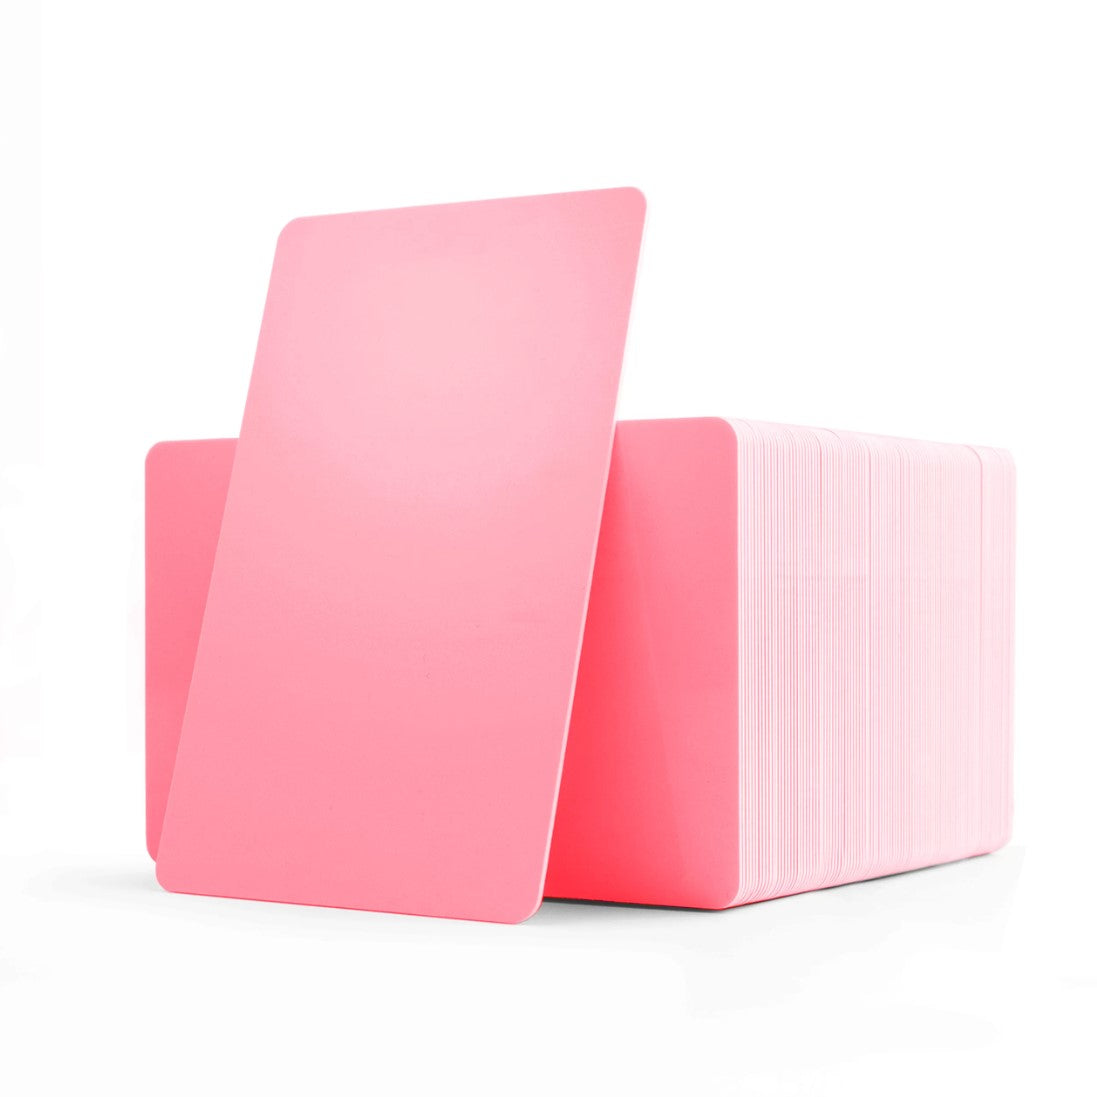 PVC CR80 Pink Coloured Cards With Solid Core Coloured Edges - 1 - 100